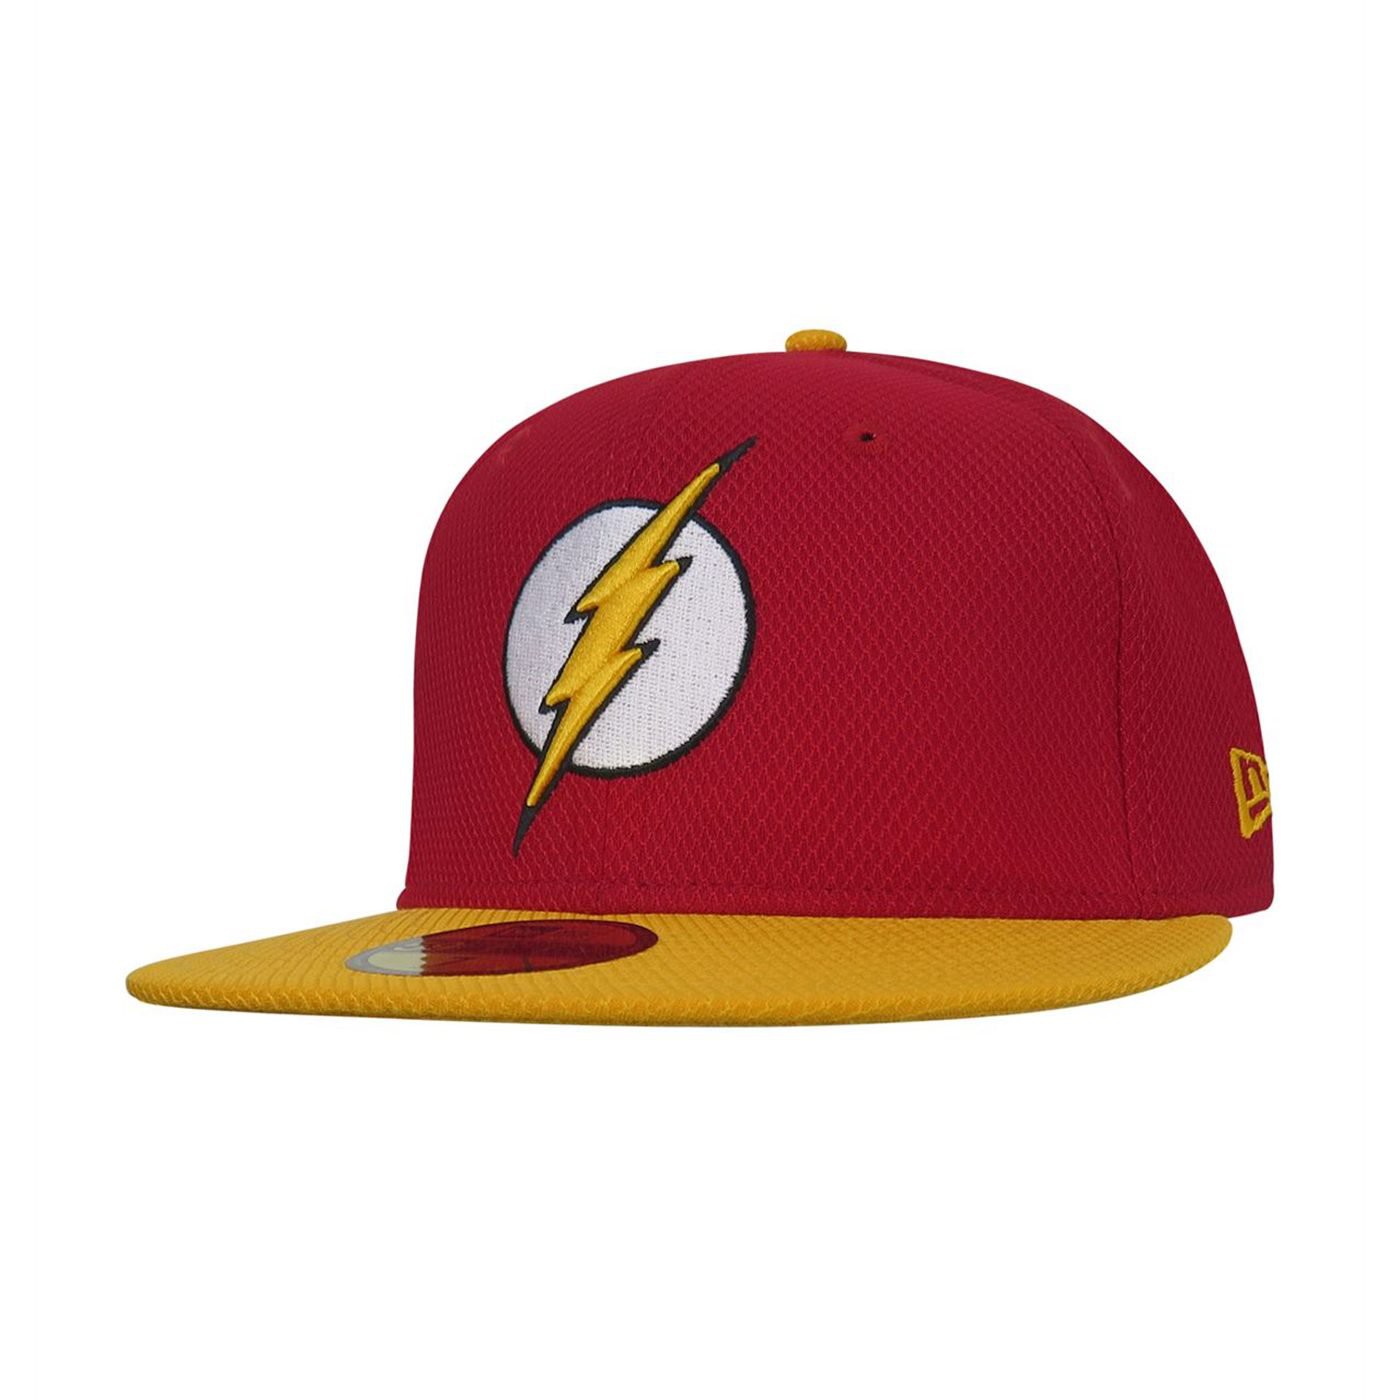 Flash Symbol Red 59Fifty Hat